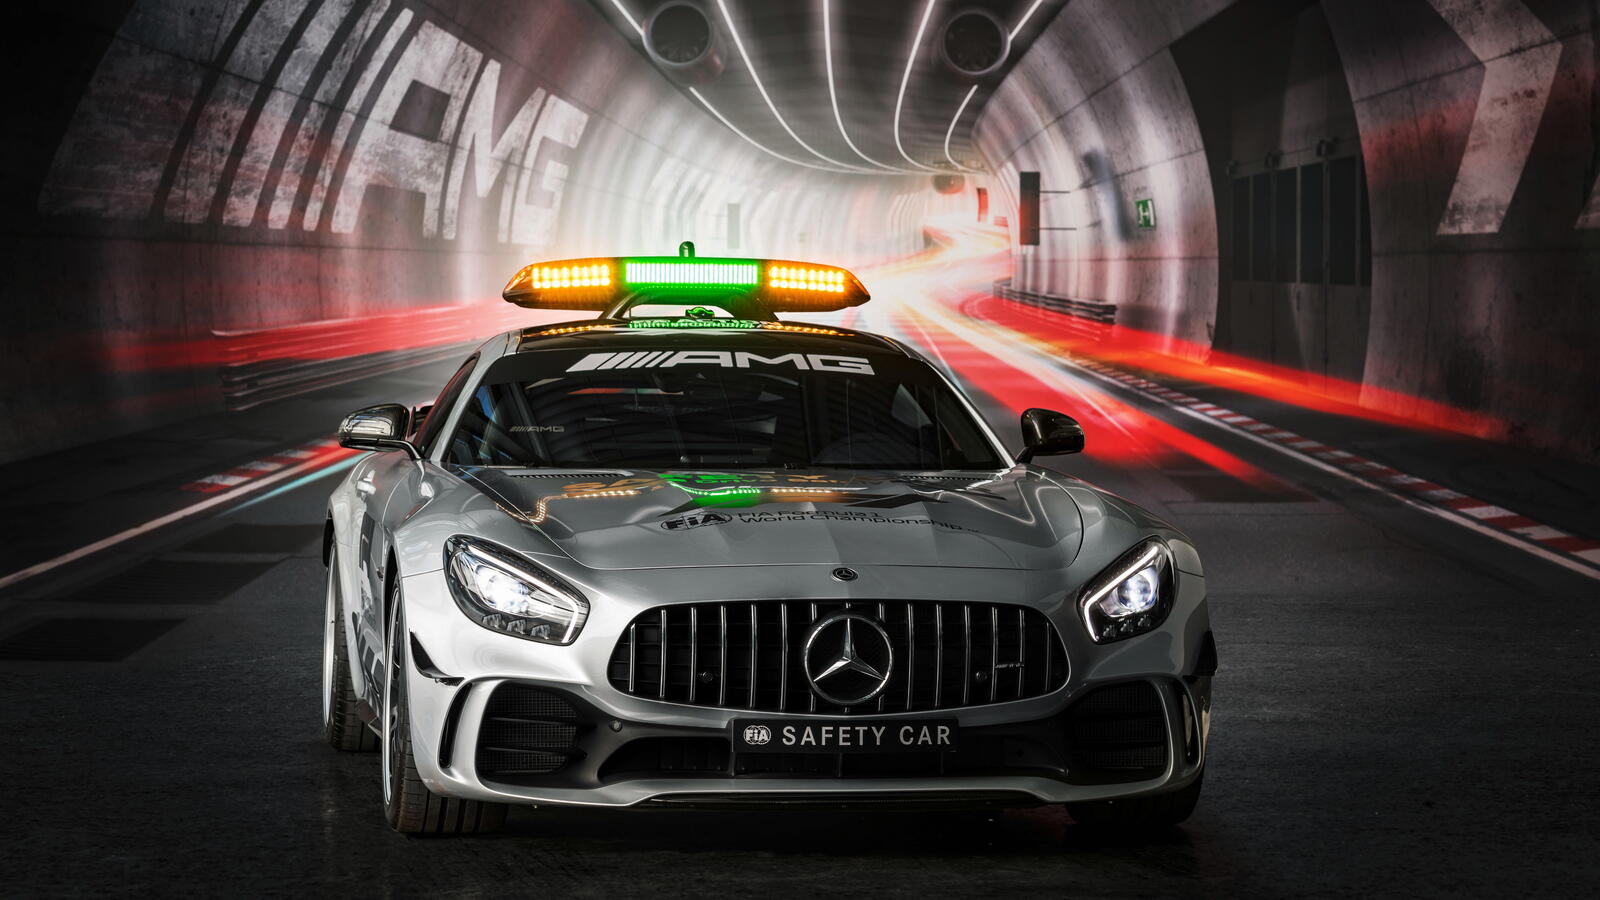 Free photo Mercedes AMG GT C with flashing lights on the roof